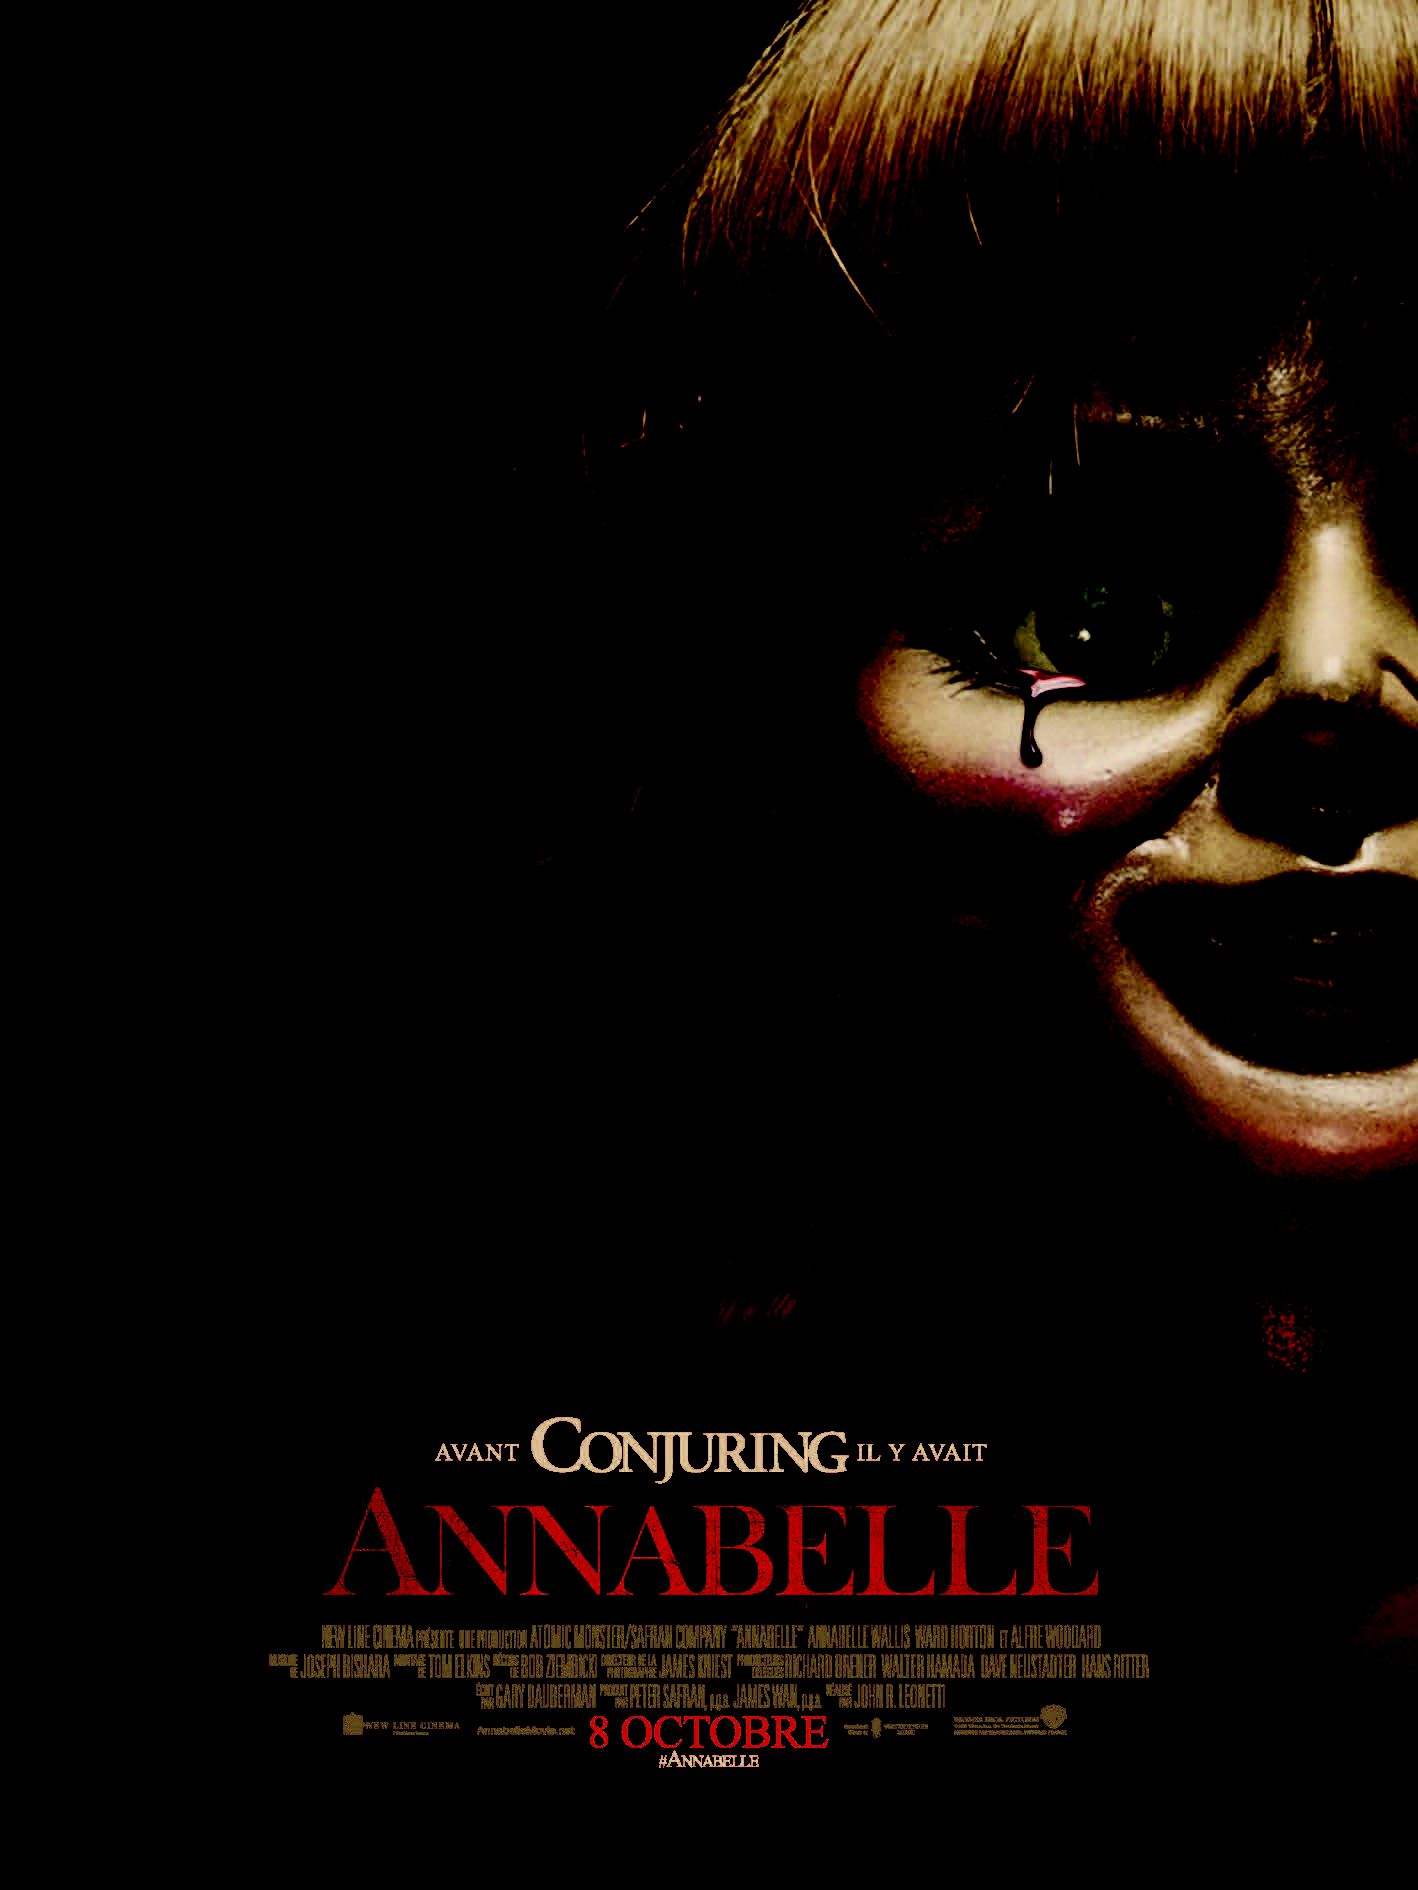 Annabelle - Film (2014) streaming VF gratuit complet